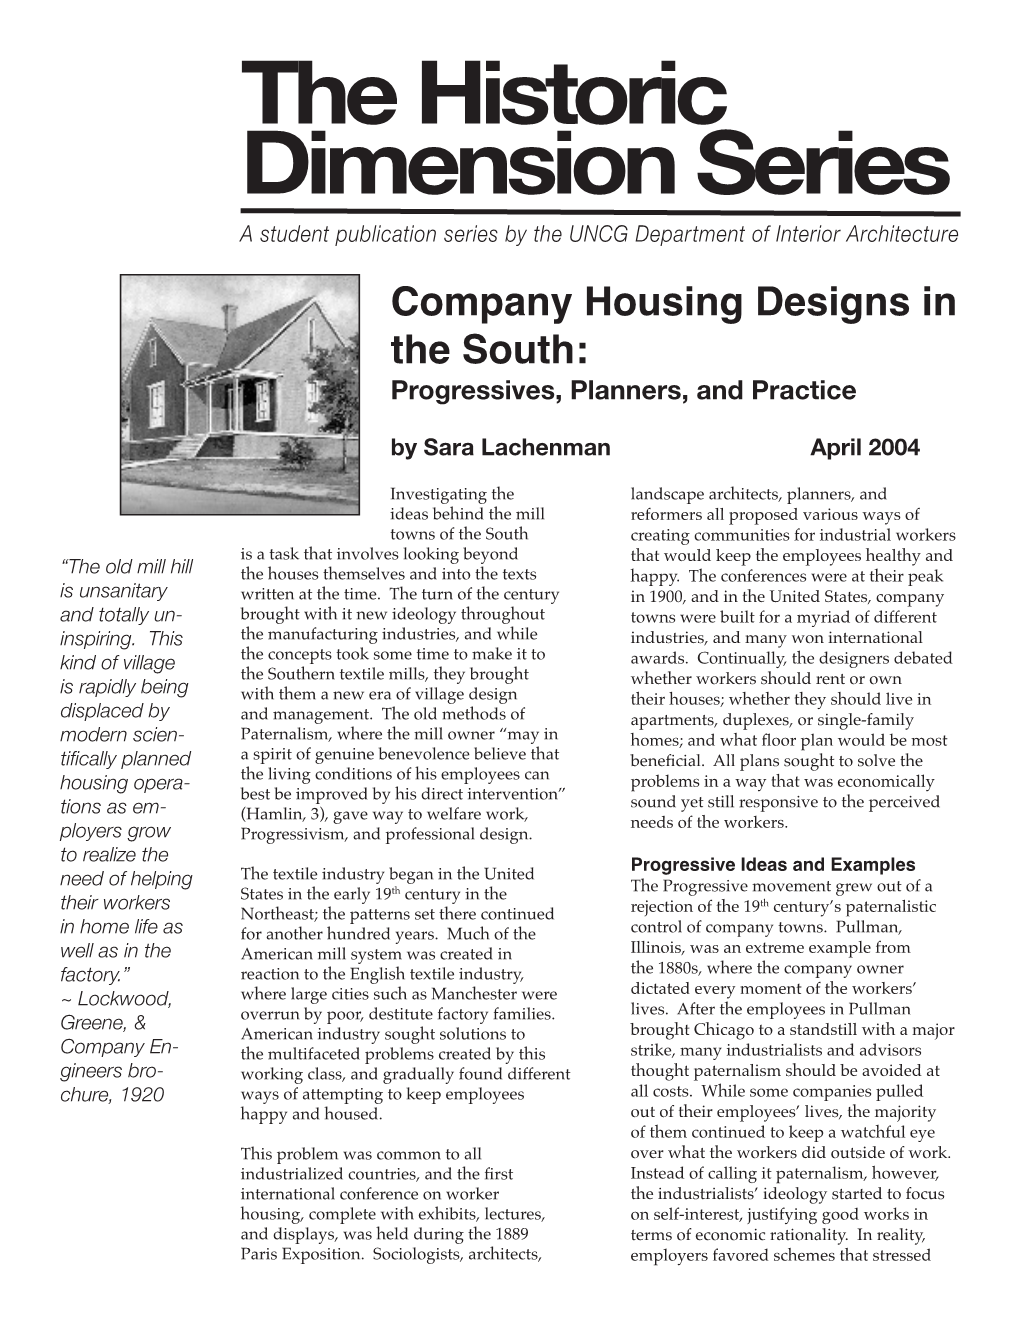 The Historic Dimension Series a Student Publication Series by the UNCG Department of Interior Architecture